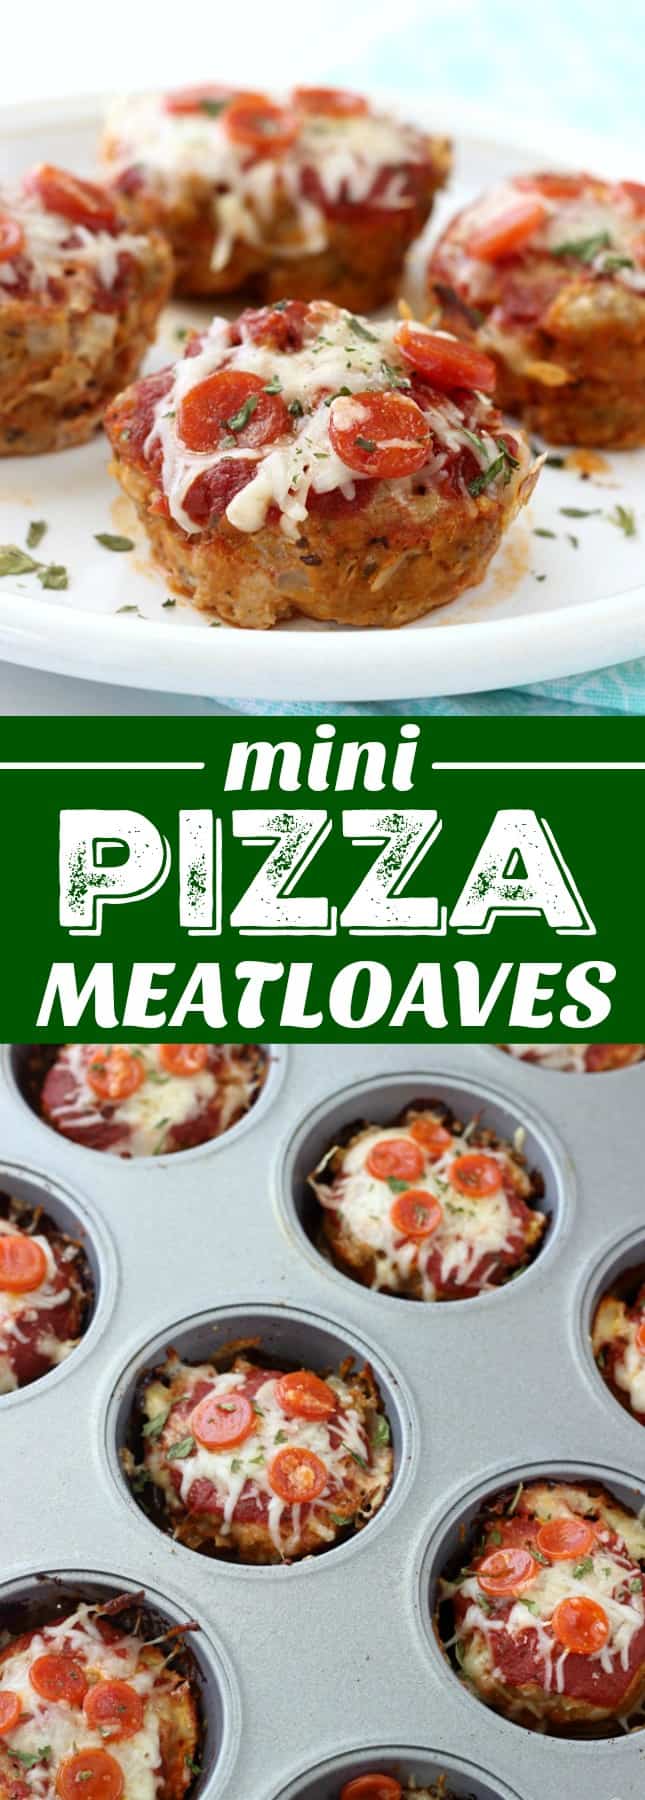 A muffin tin of mini meatloaves with pepperoni